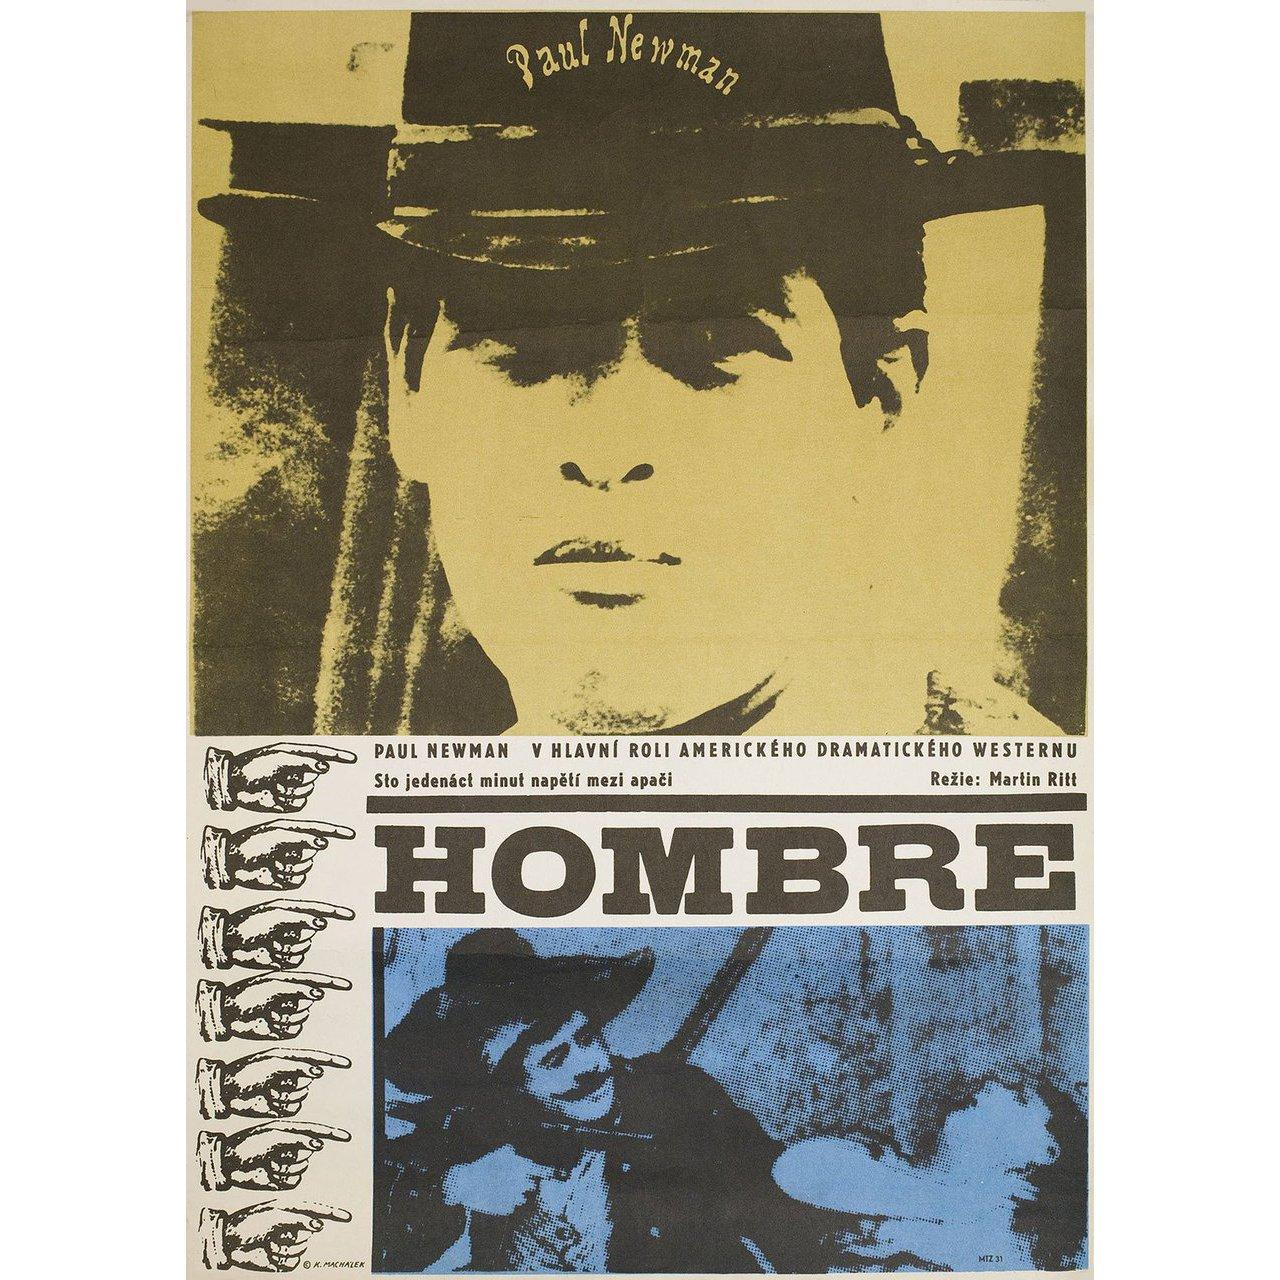 hombre movie poster